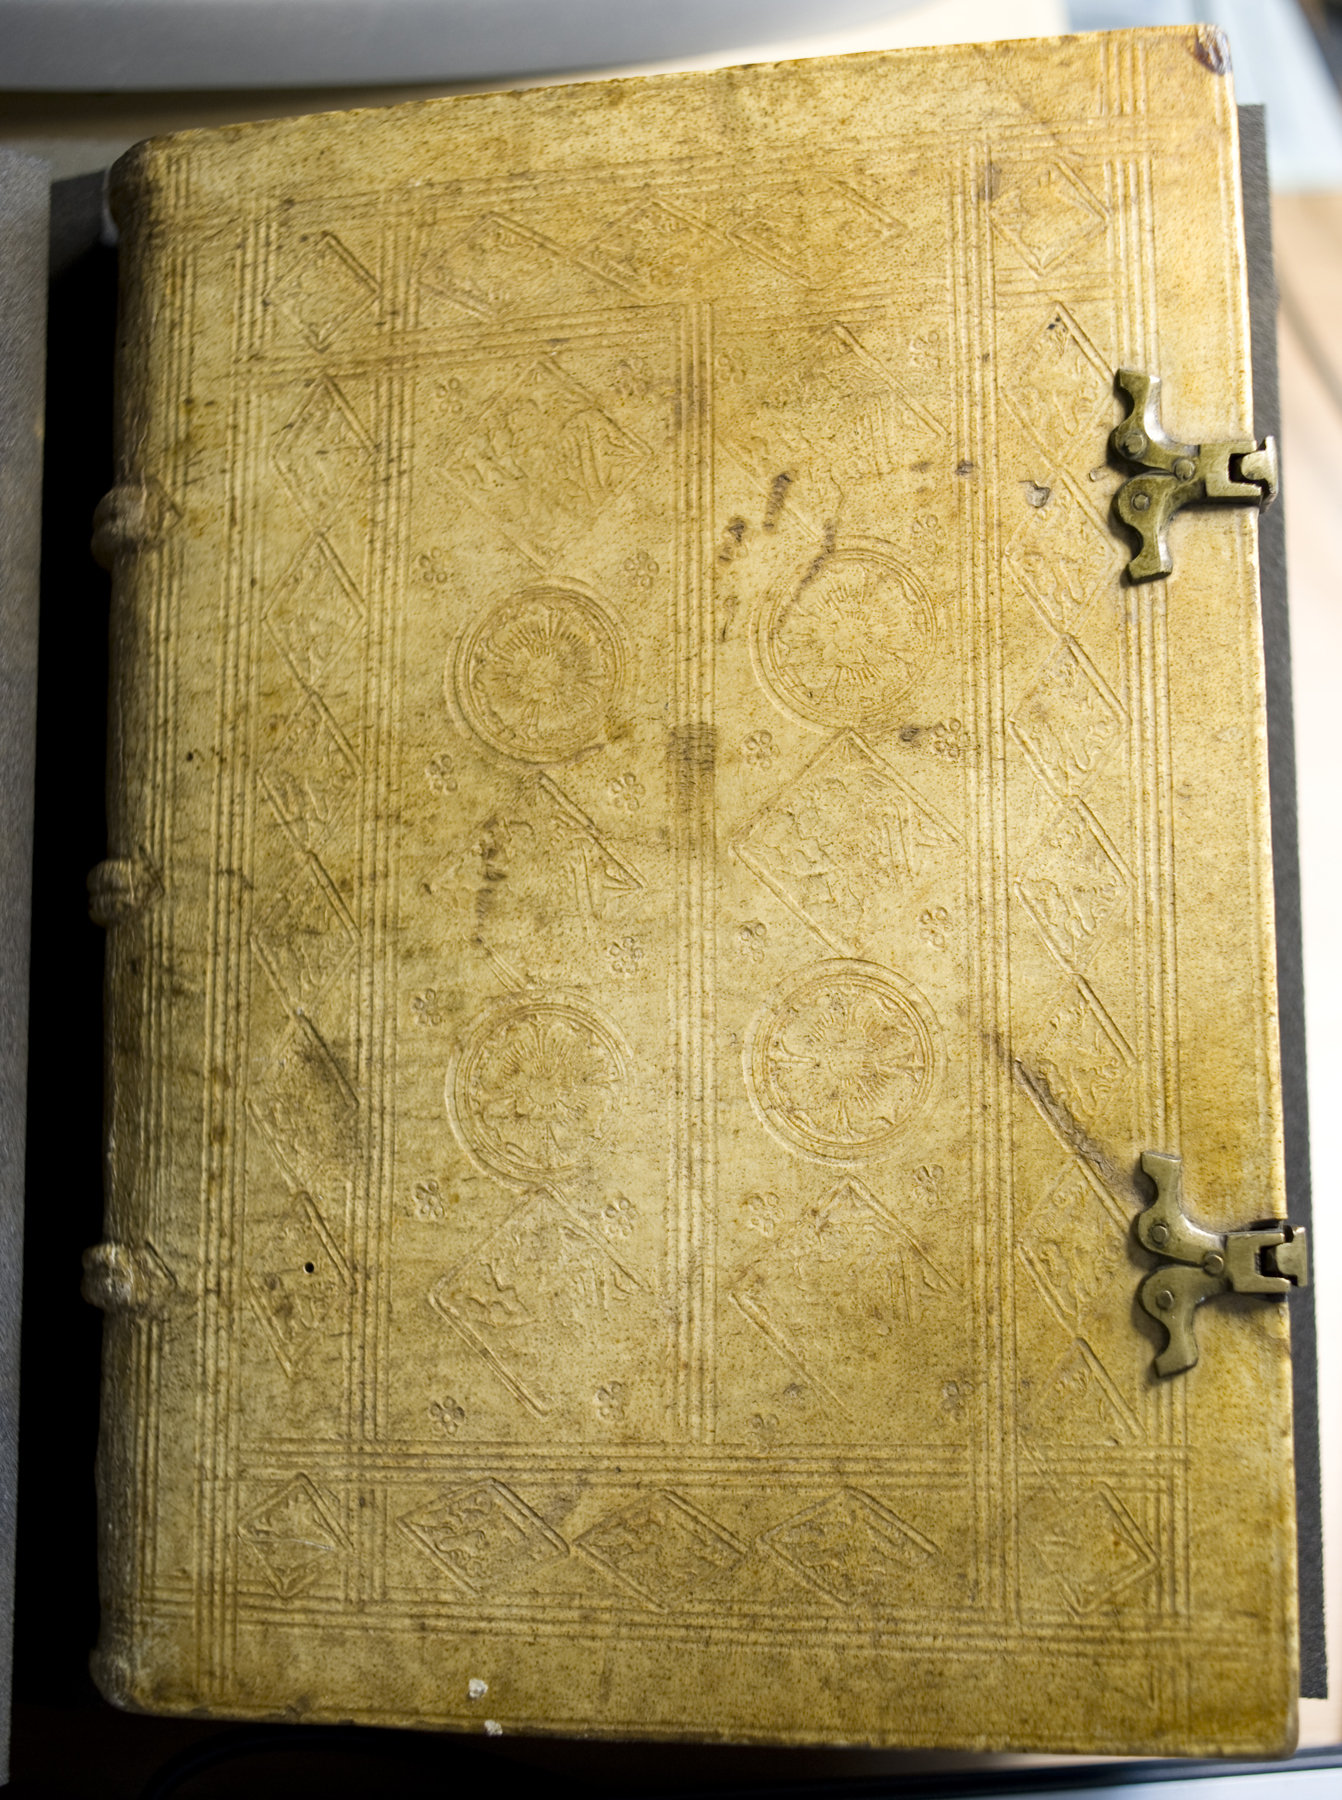 The front board of vol. 1 of the 1489 printing of Alexander of Hales's Summa universae theologiae; bound in pigskin on wooden boards and decorated with various blind stamps.